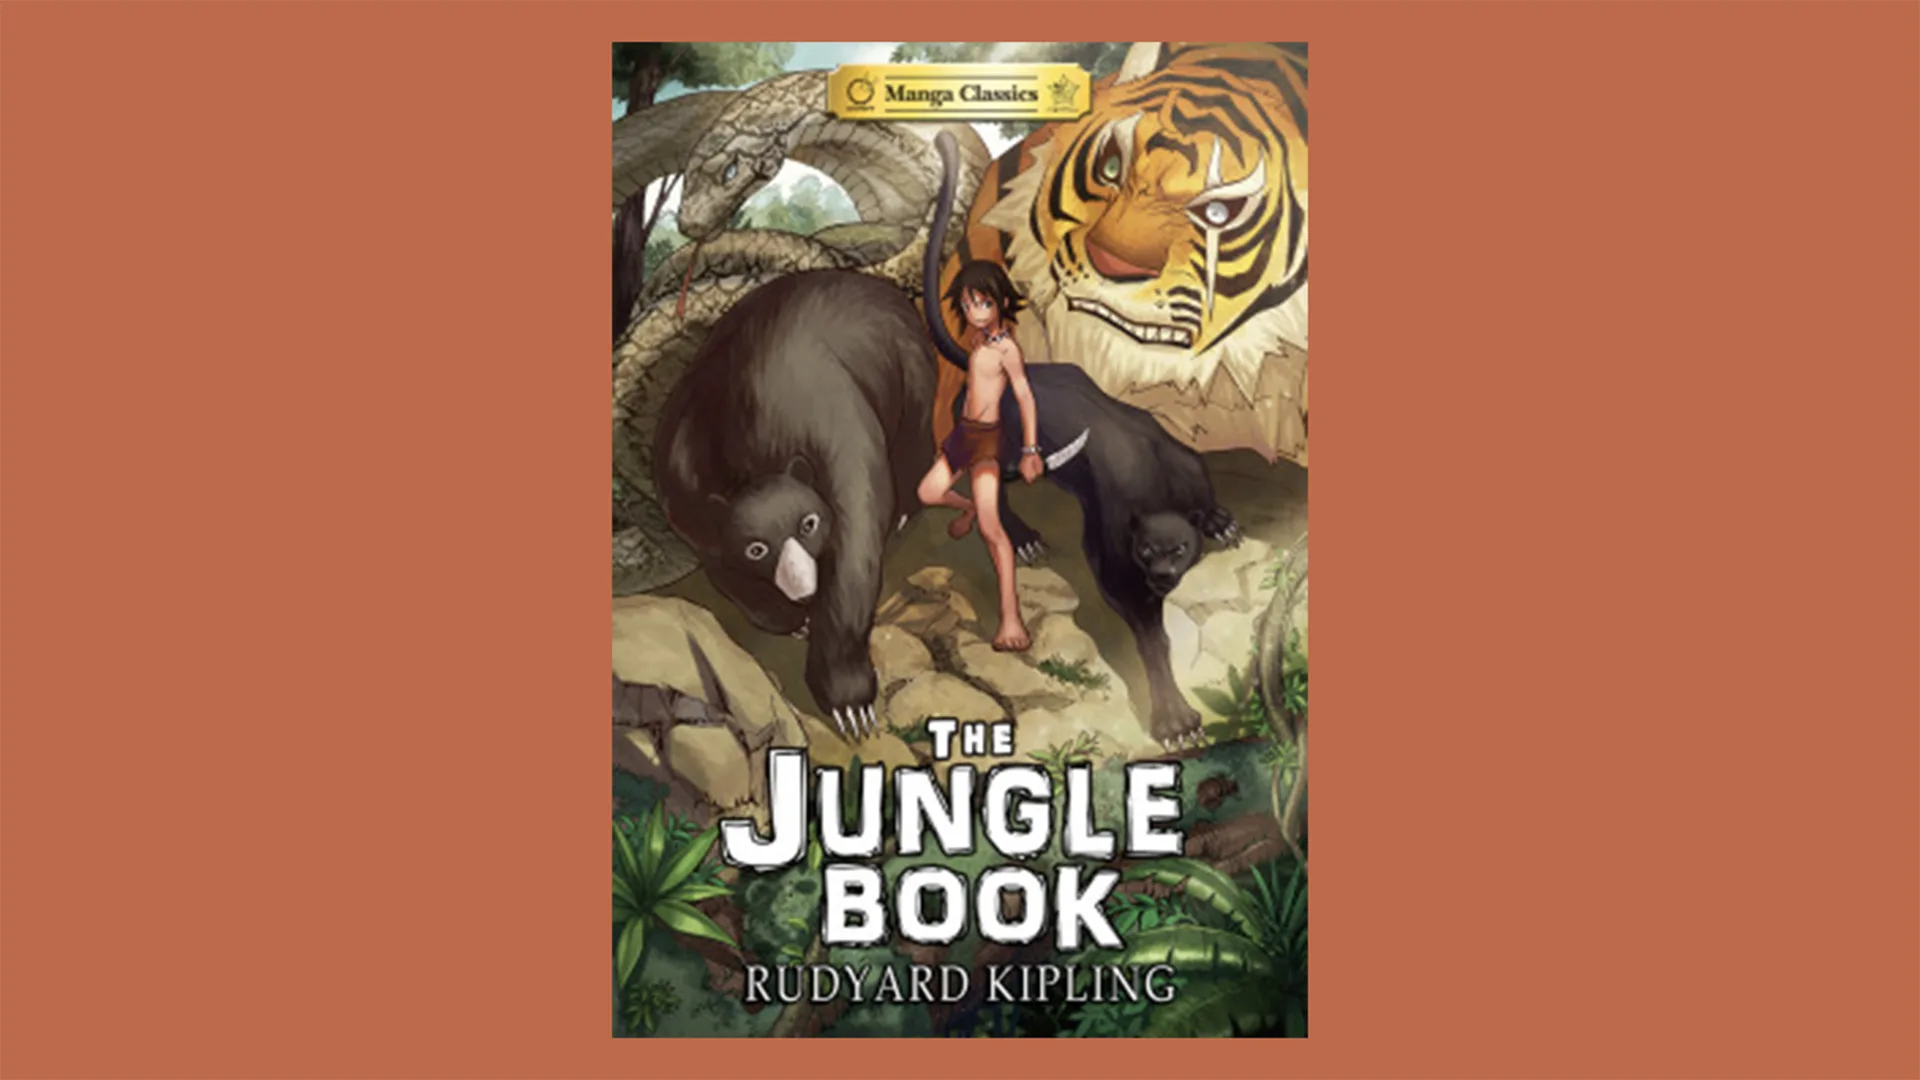 The graphic novel book cover of The Jungle Book